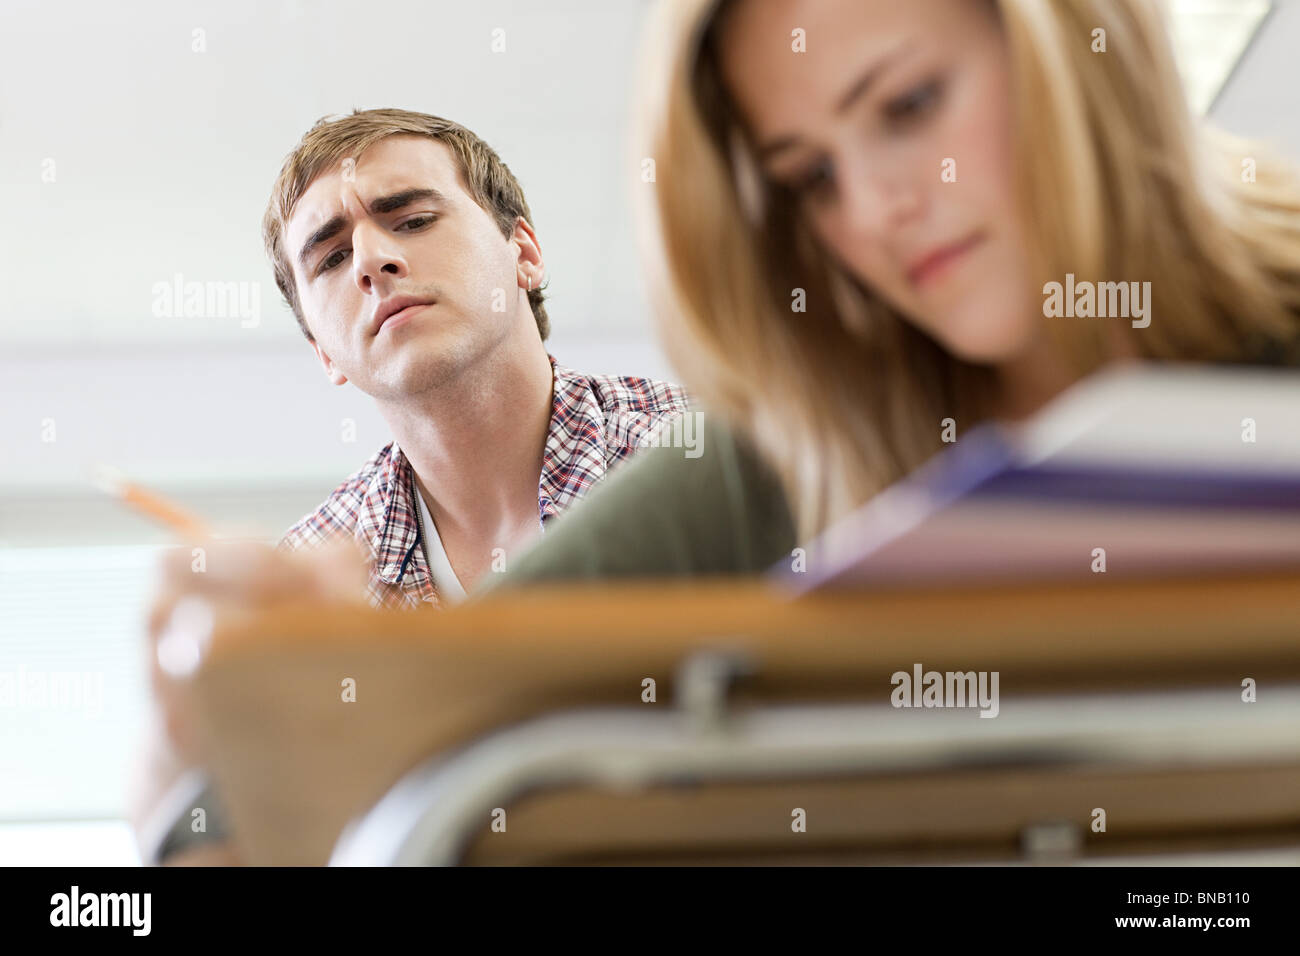 Male high school student copying classmate's work Stock Photo